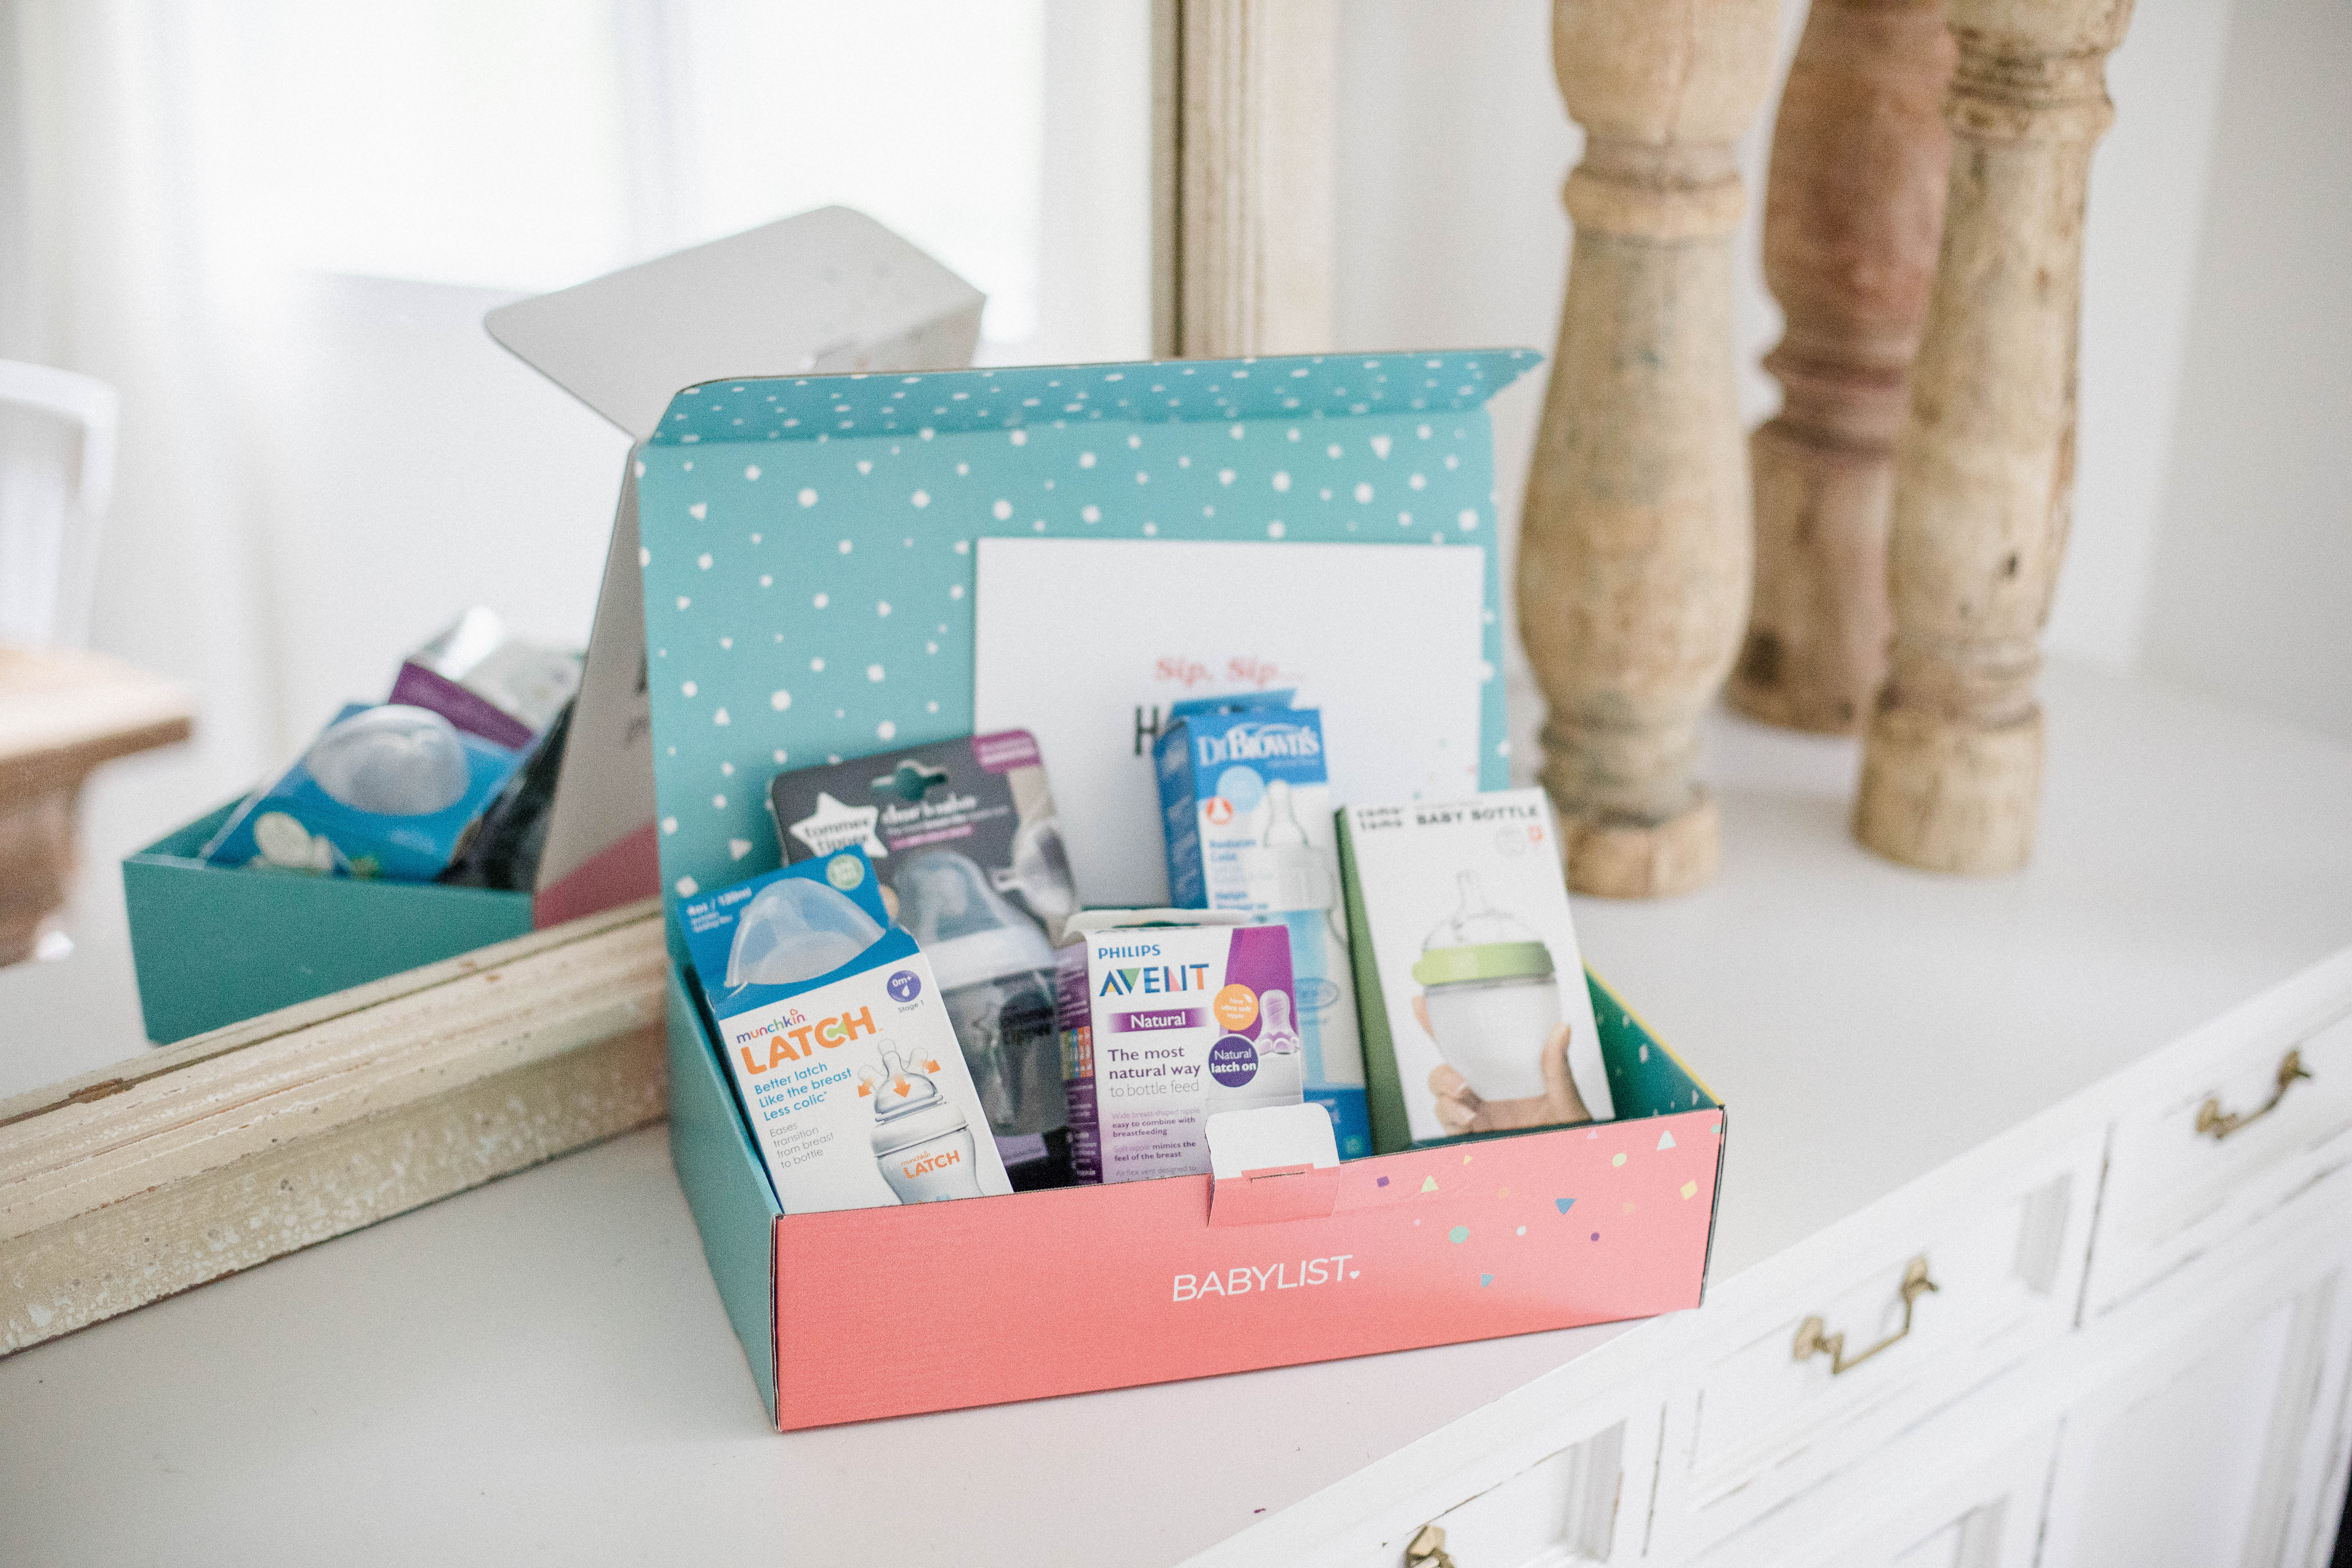 Connecticut life and style blogger Lauren McBride shares Babylist's Baby Bottle Box, a new item from Babylist that featured the top 5 bottles according to registries for parents to try.